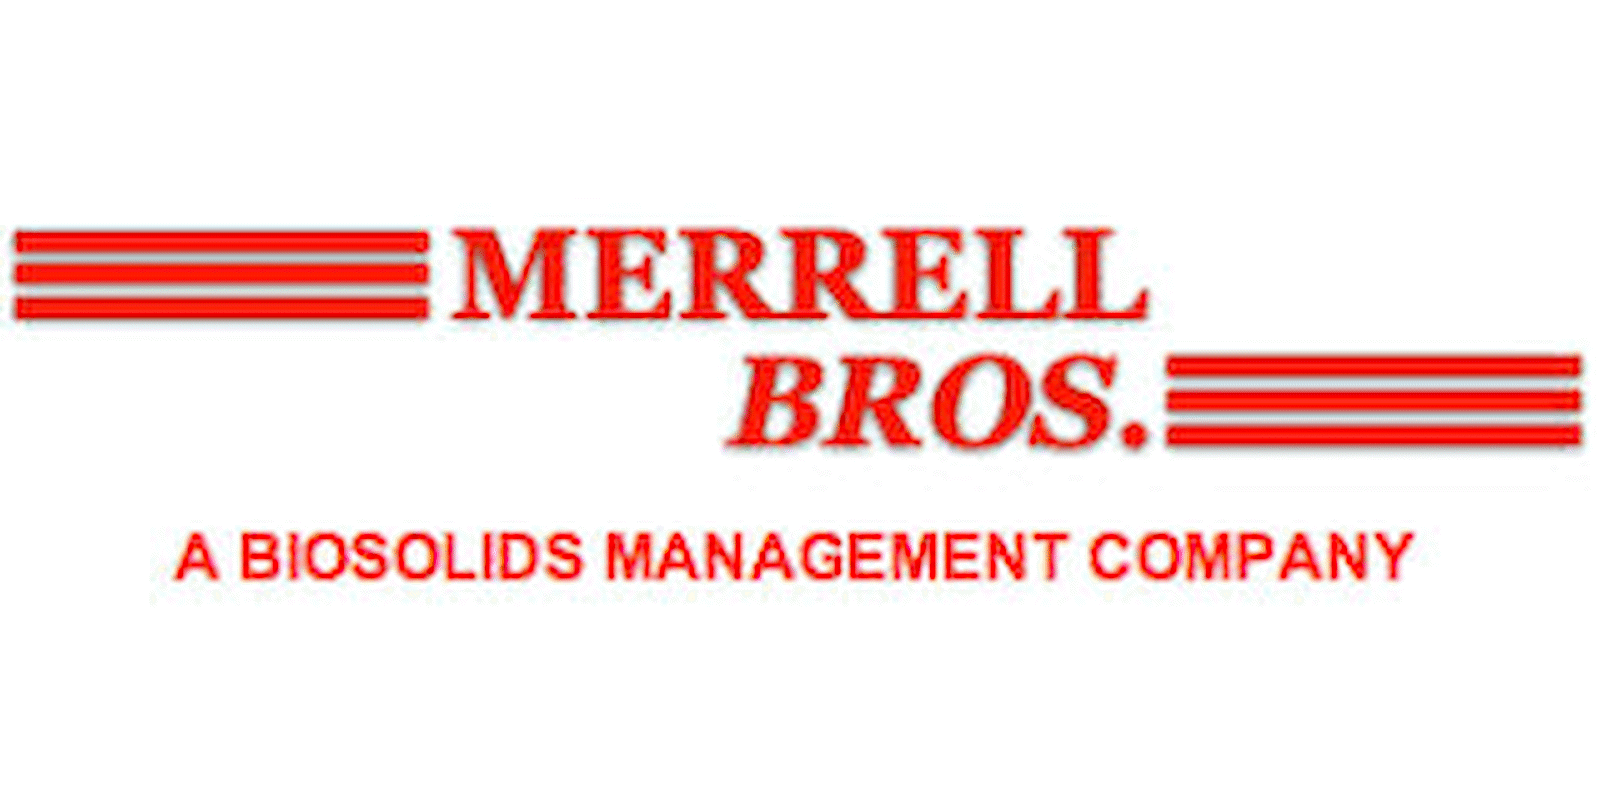 Merrell Brothers